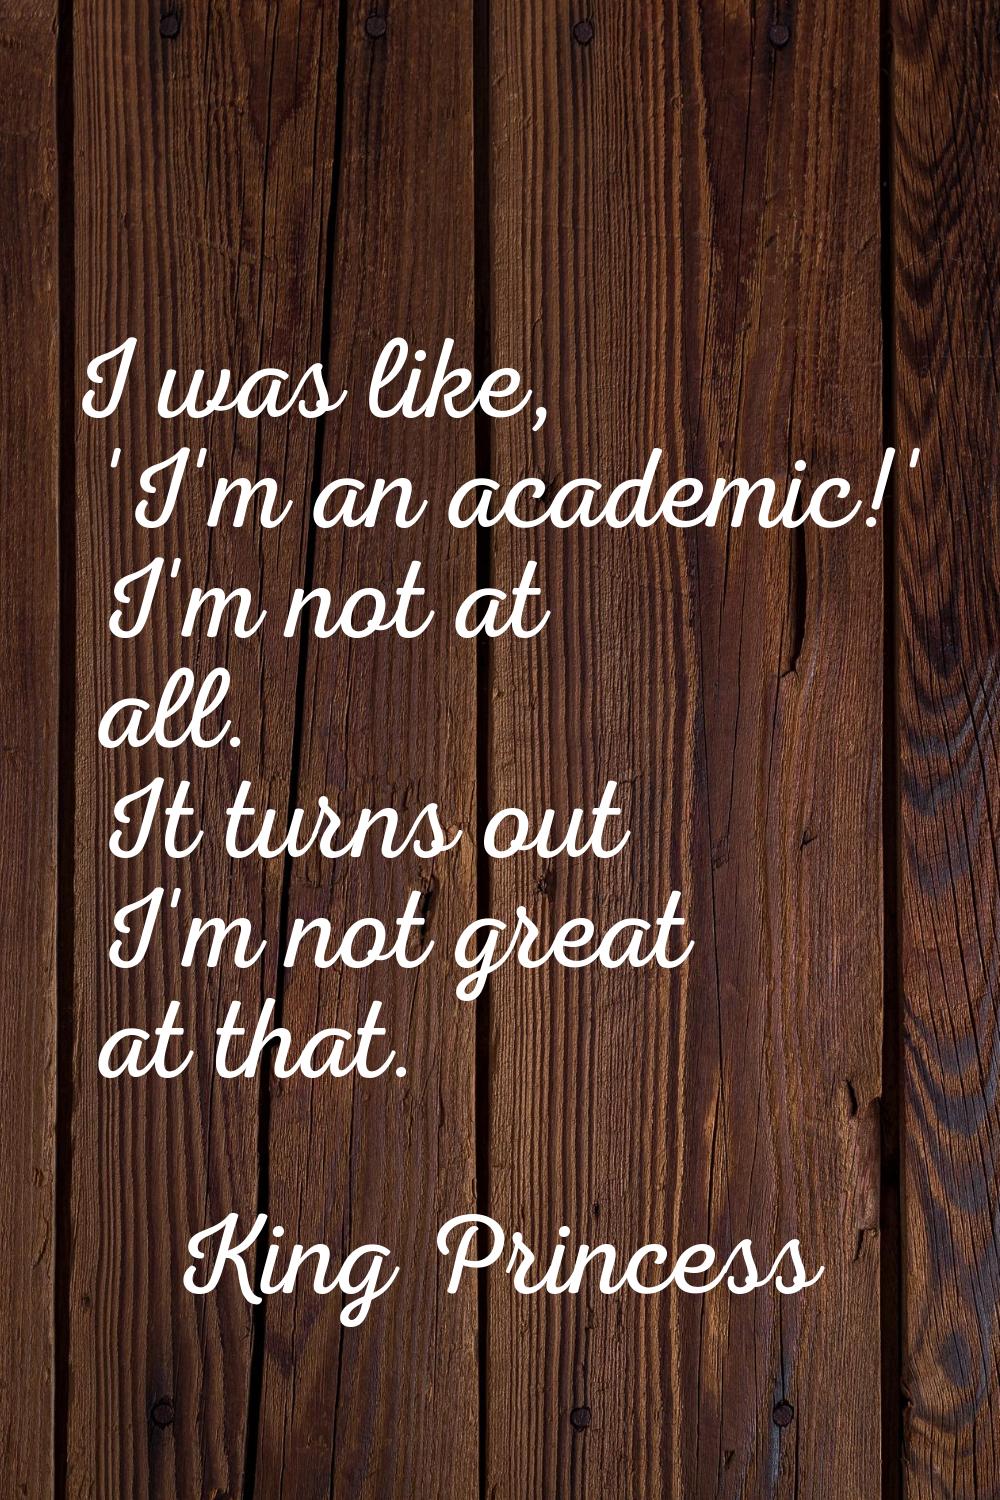 I was like, 'I'm an academic!' I'm not at all. It turns out I'm not great at that.